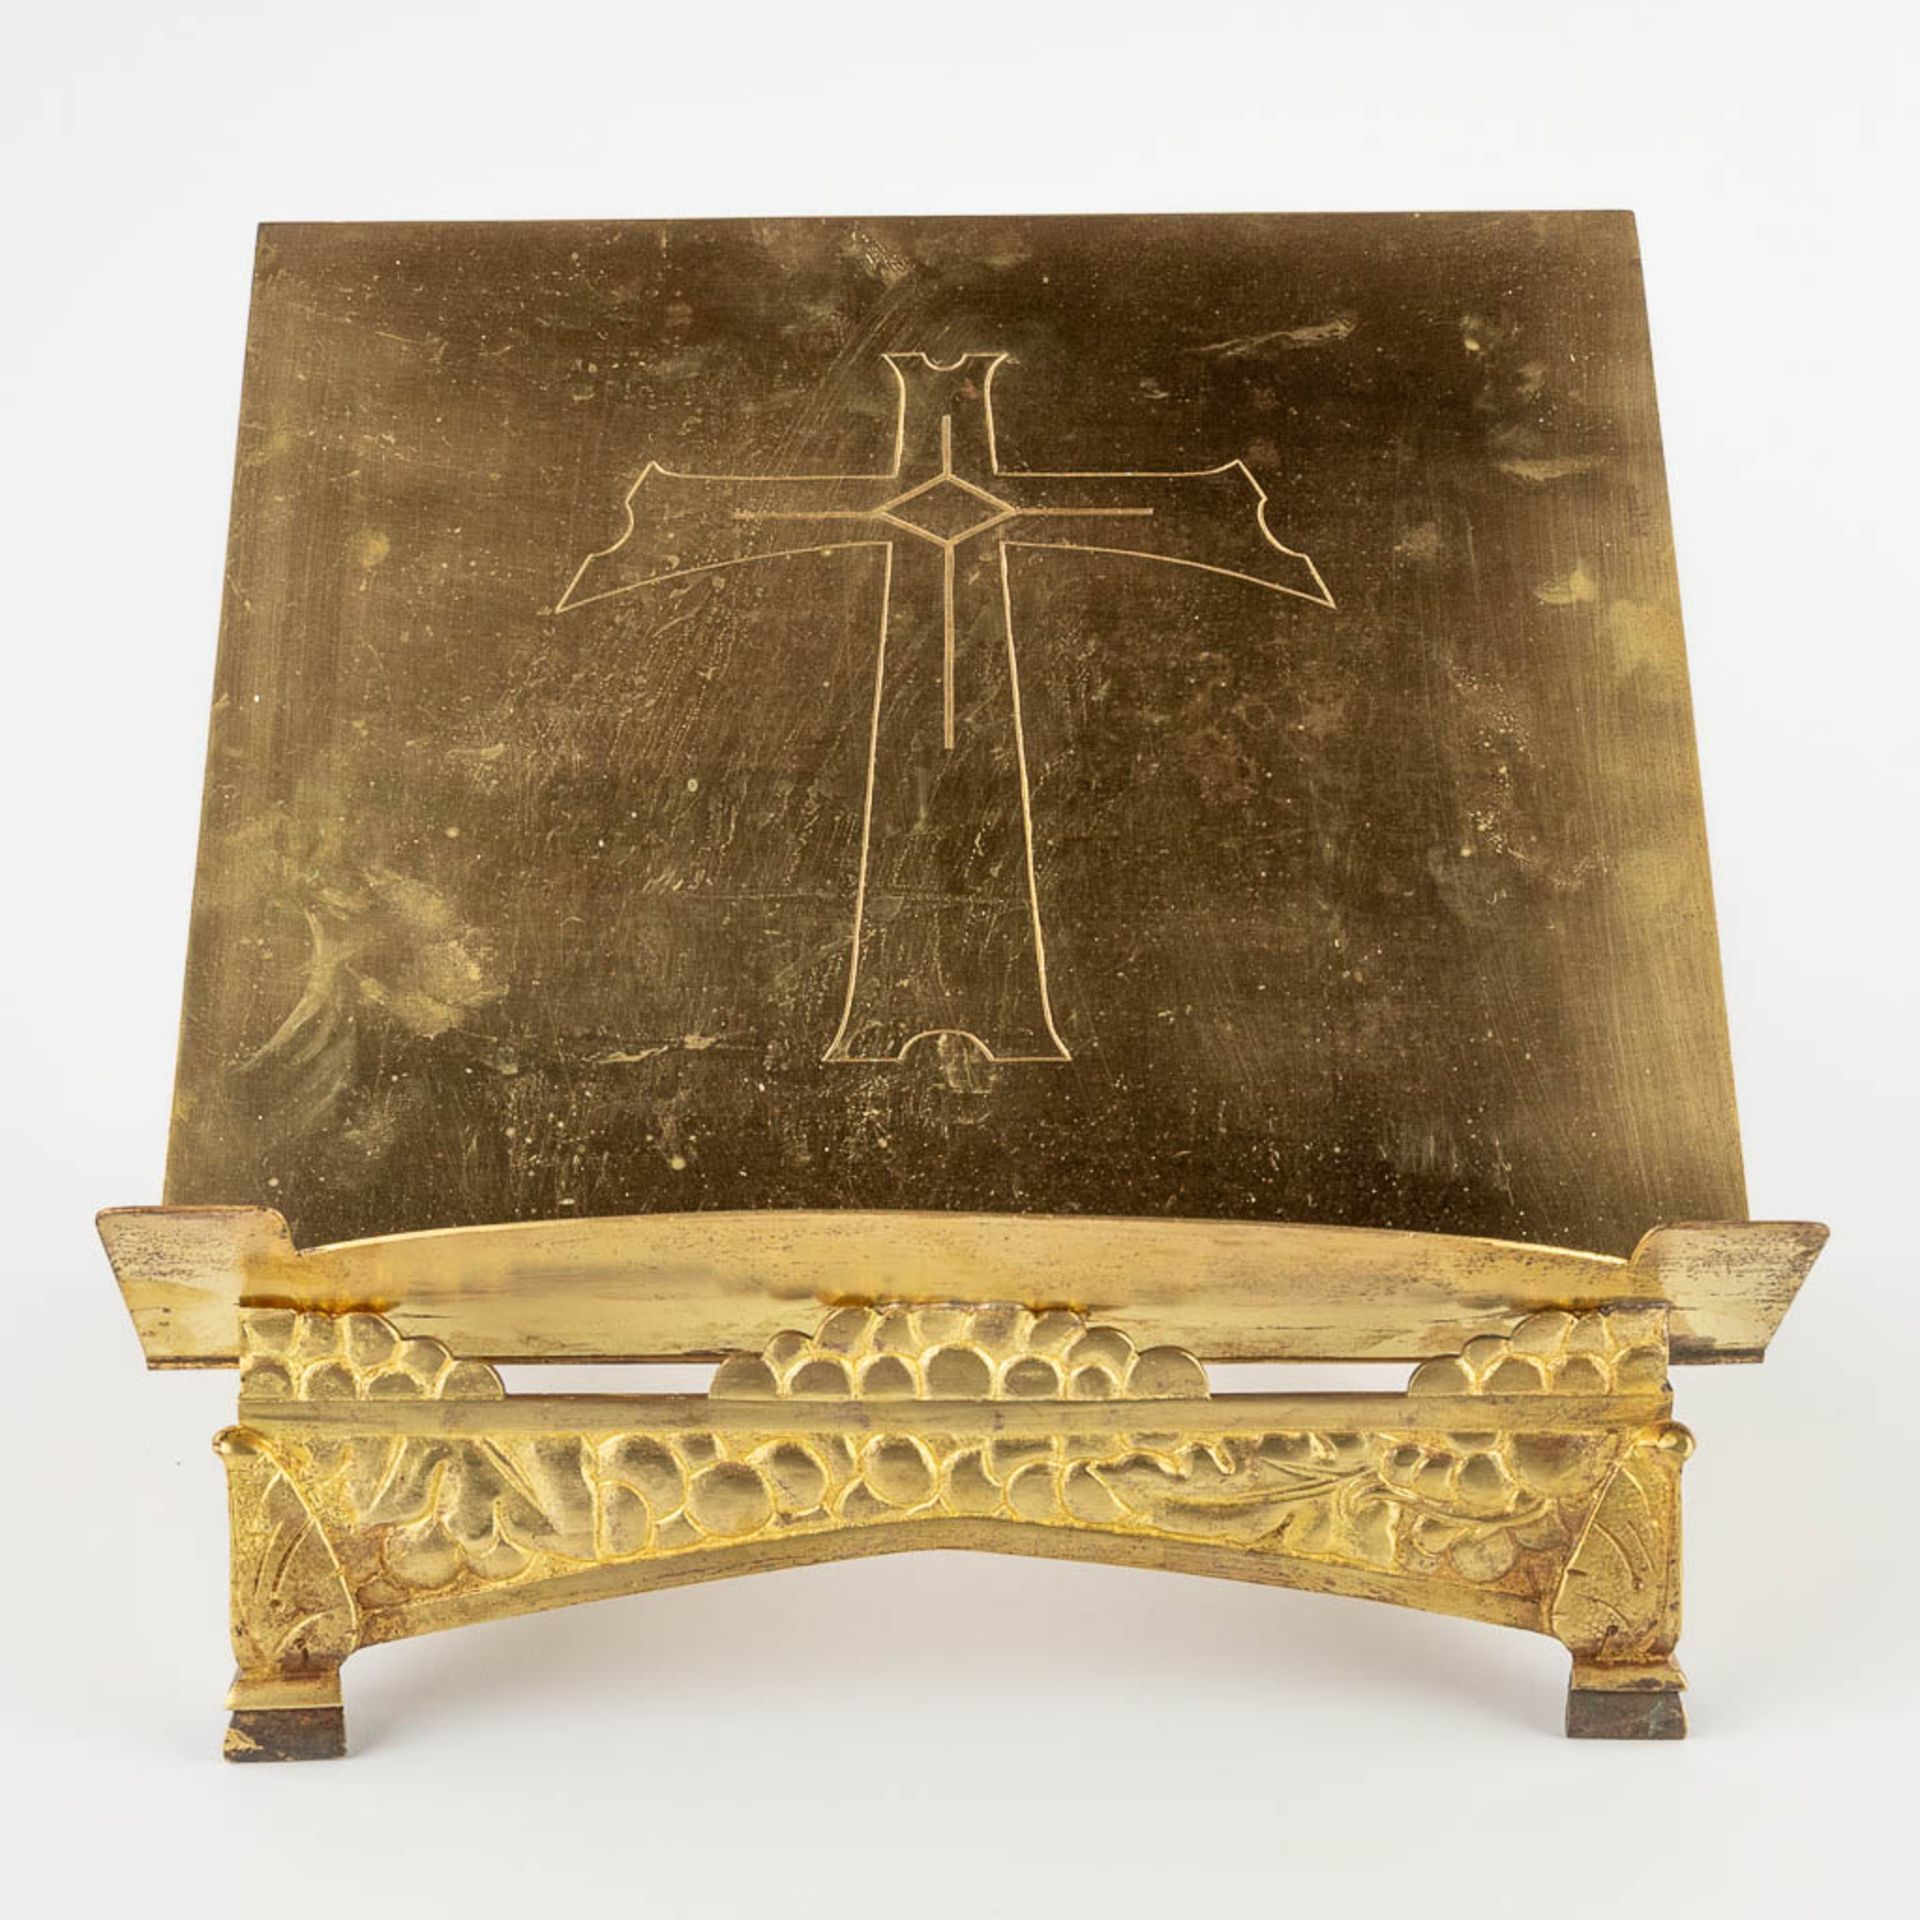 A lectern, bronze in art deco style. 20th C. (D:34 x W:33 x H:34 cm) - Image 3 of 10